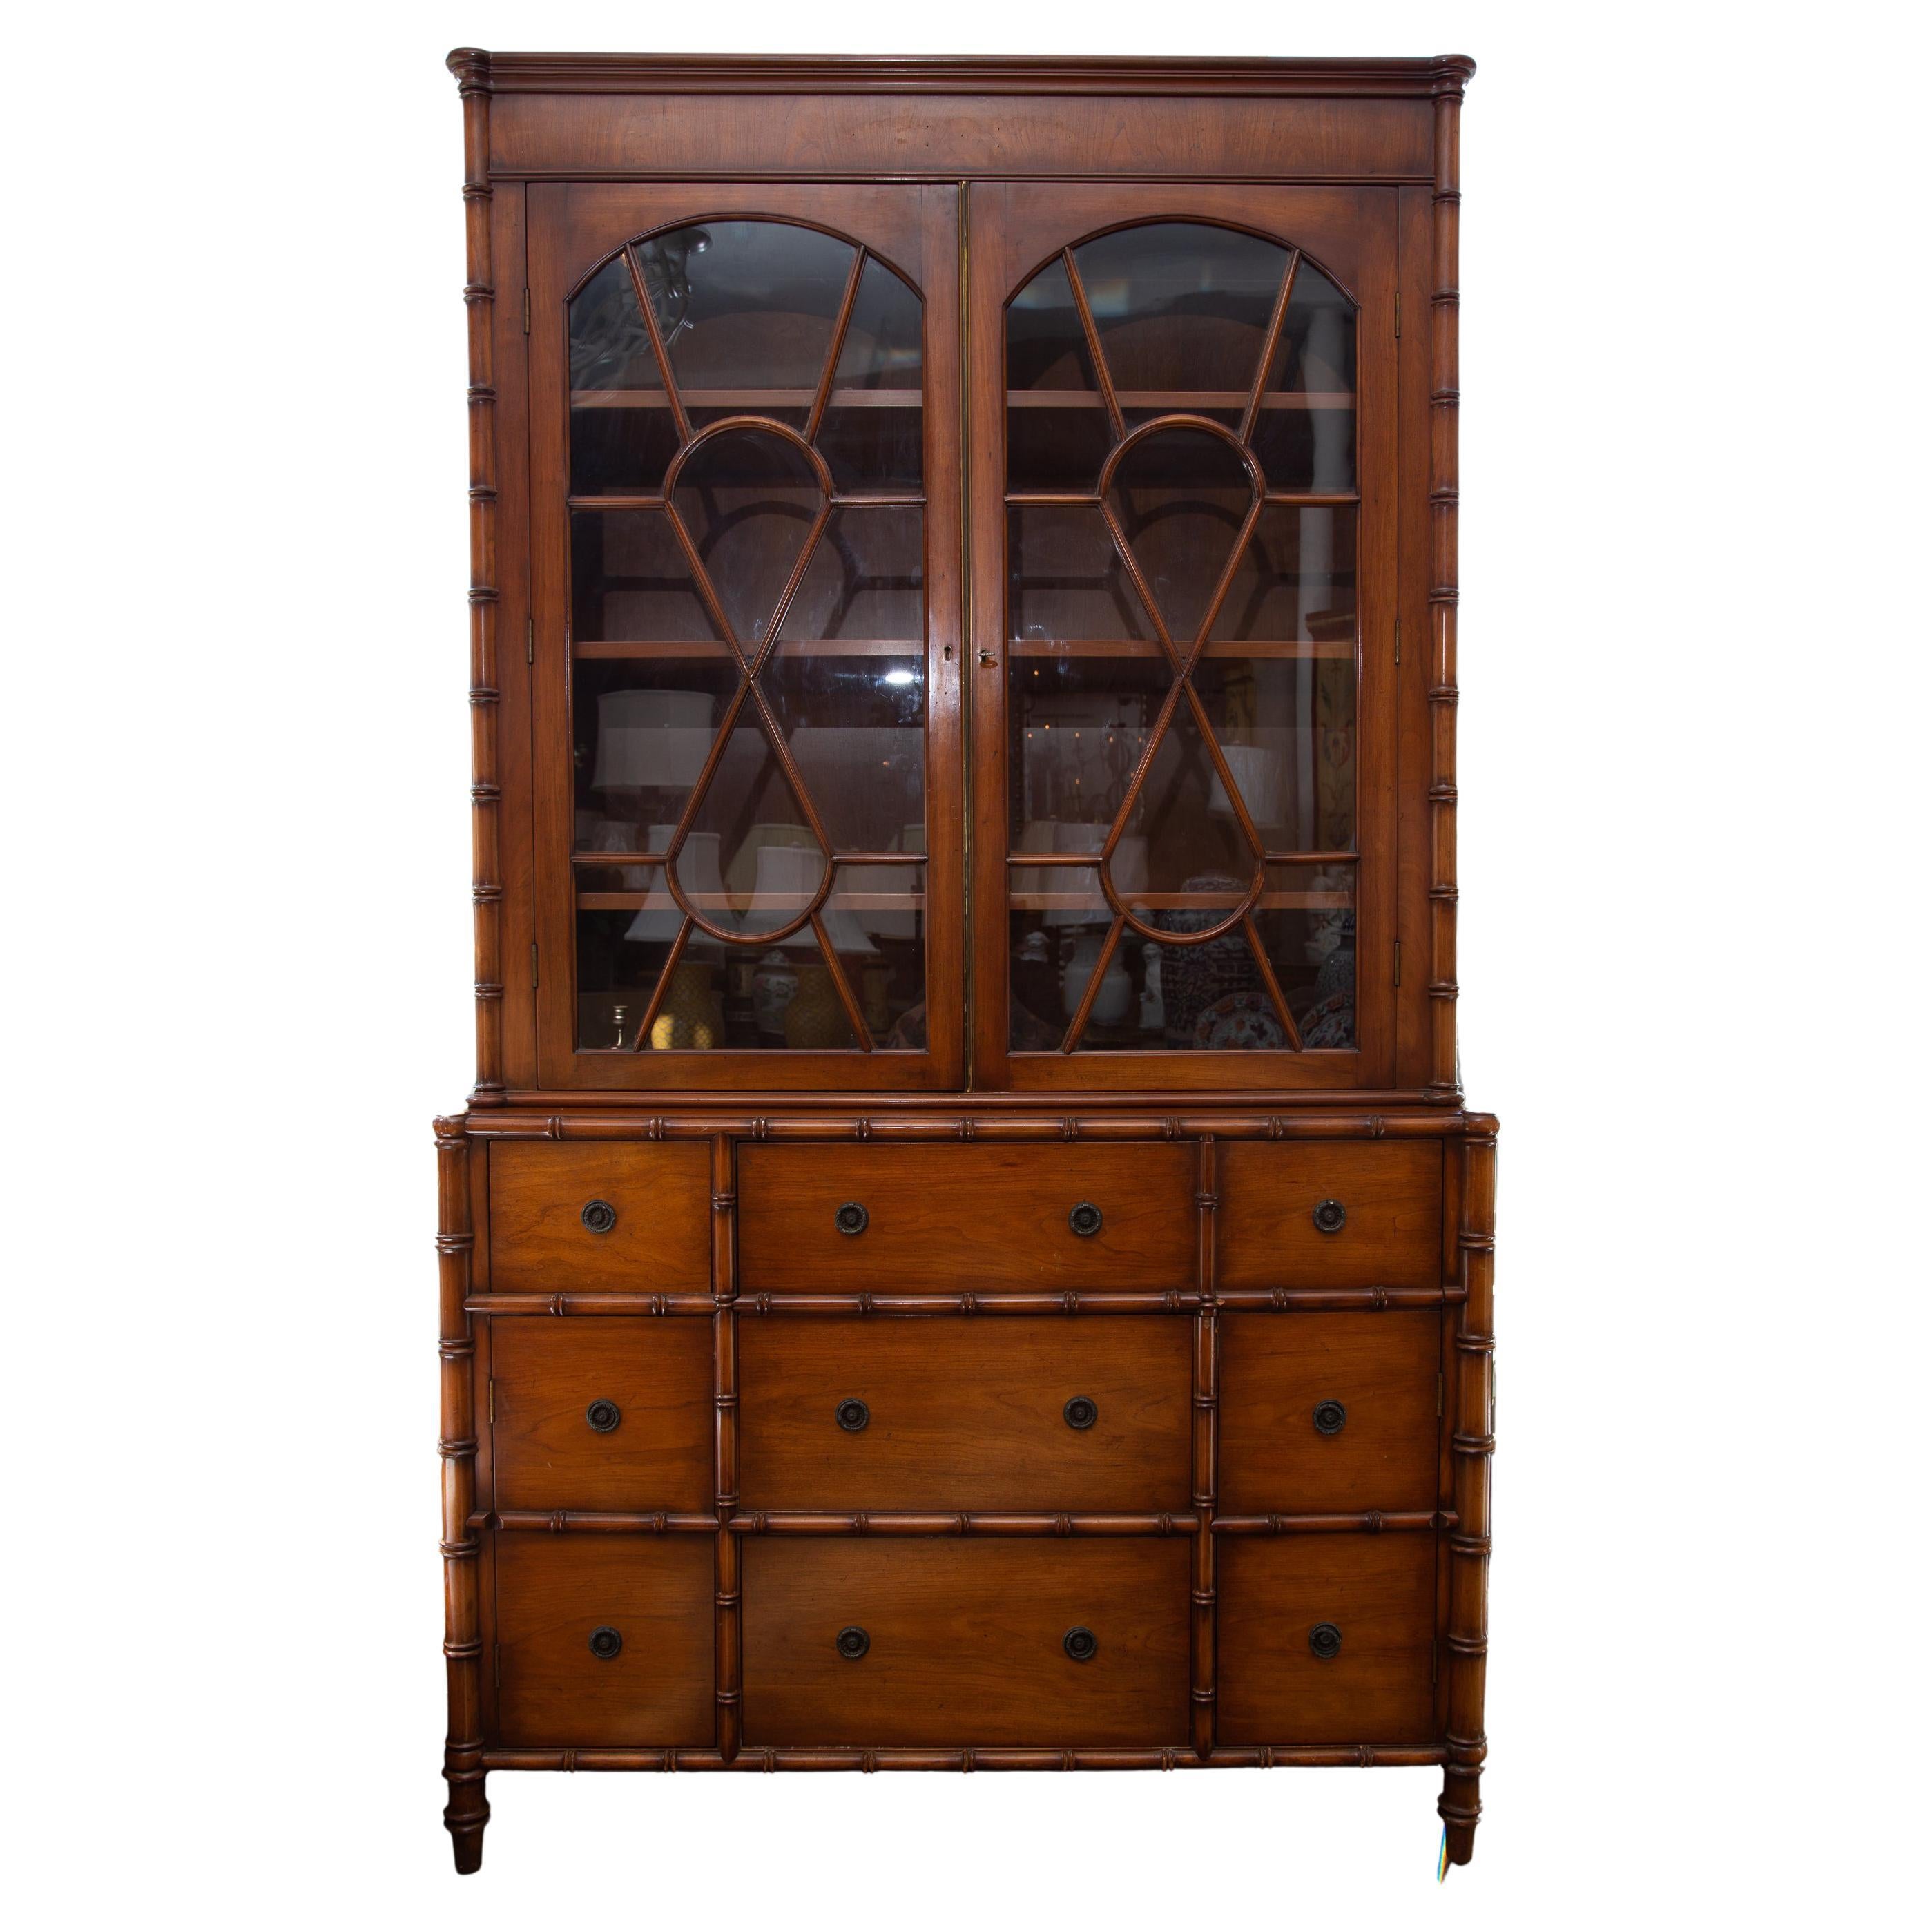 This is a warm, mellow French faux bambooLouis XVI style bookcase/secretaire. The narrow molded cornice and prominent frieze are positioned over two glazed cabinet doors with figure-eight mullions and flanked by faux bamboo corners. The bottom